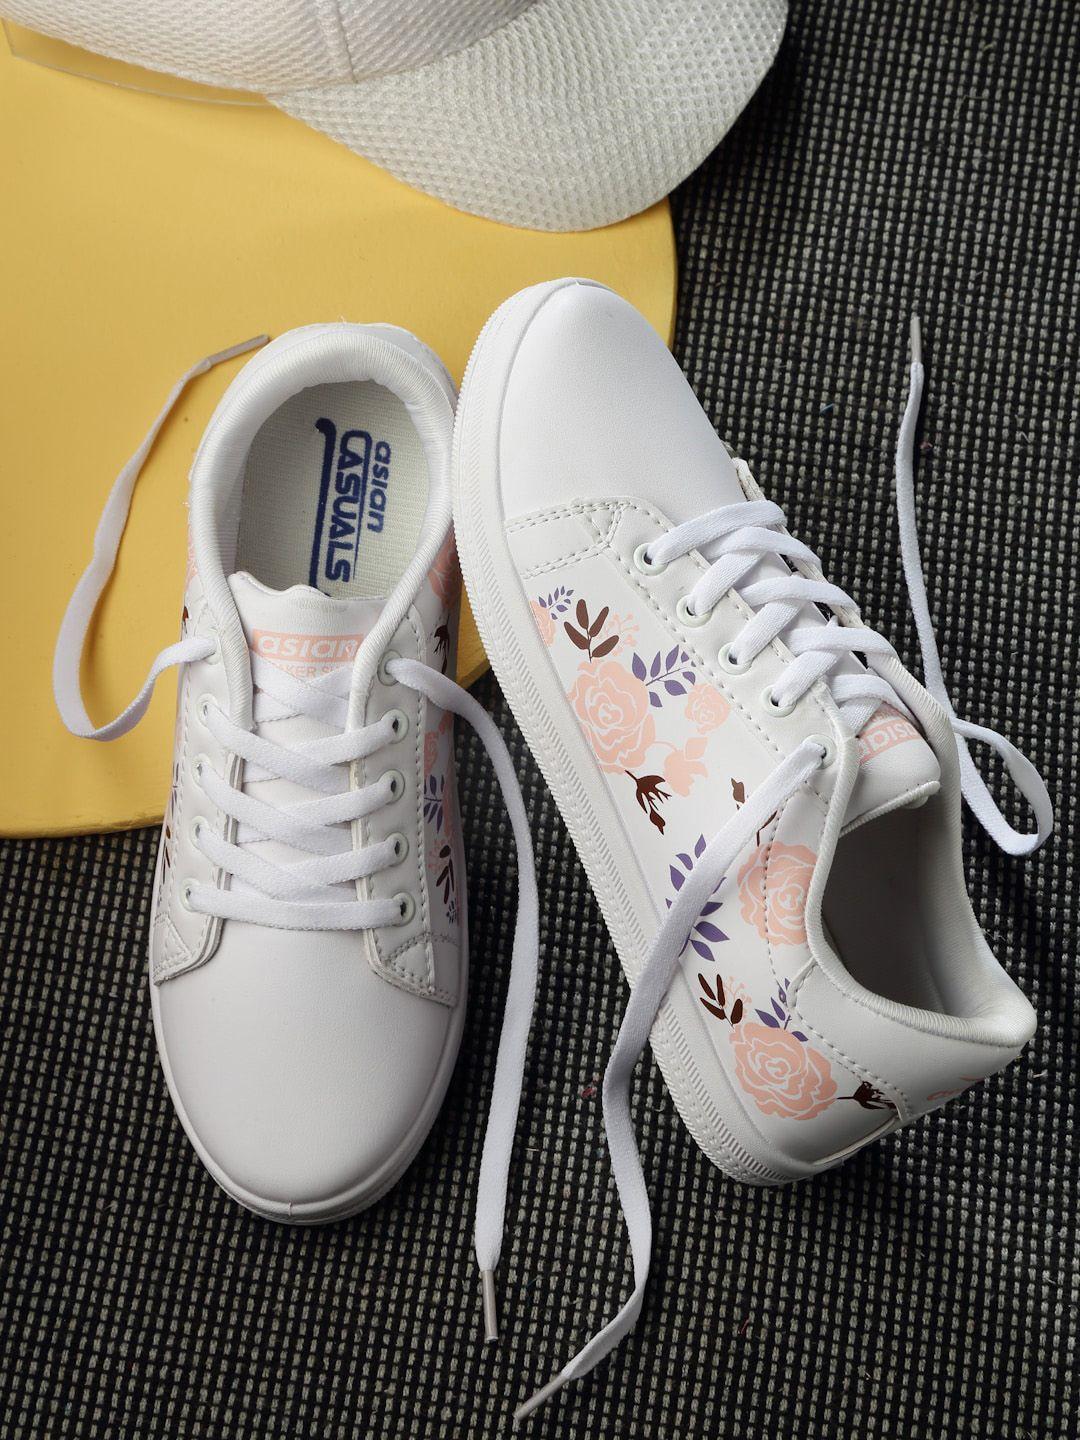 asian women floral printed lightweight sneakers